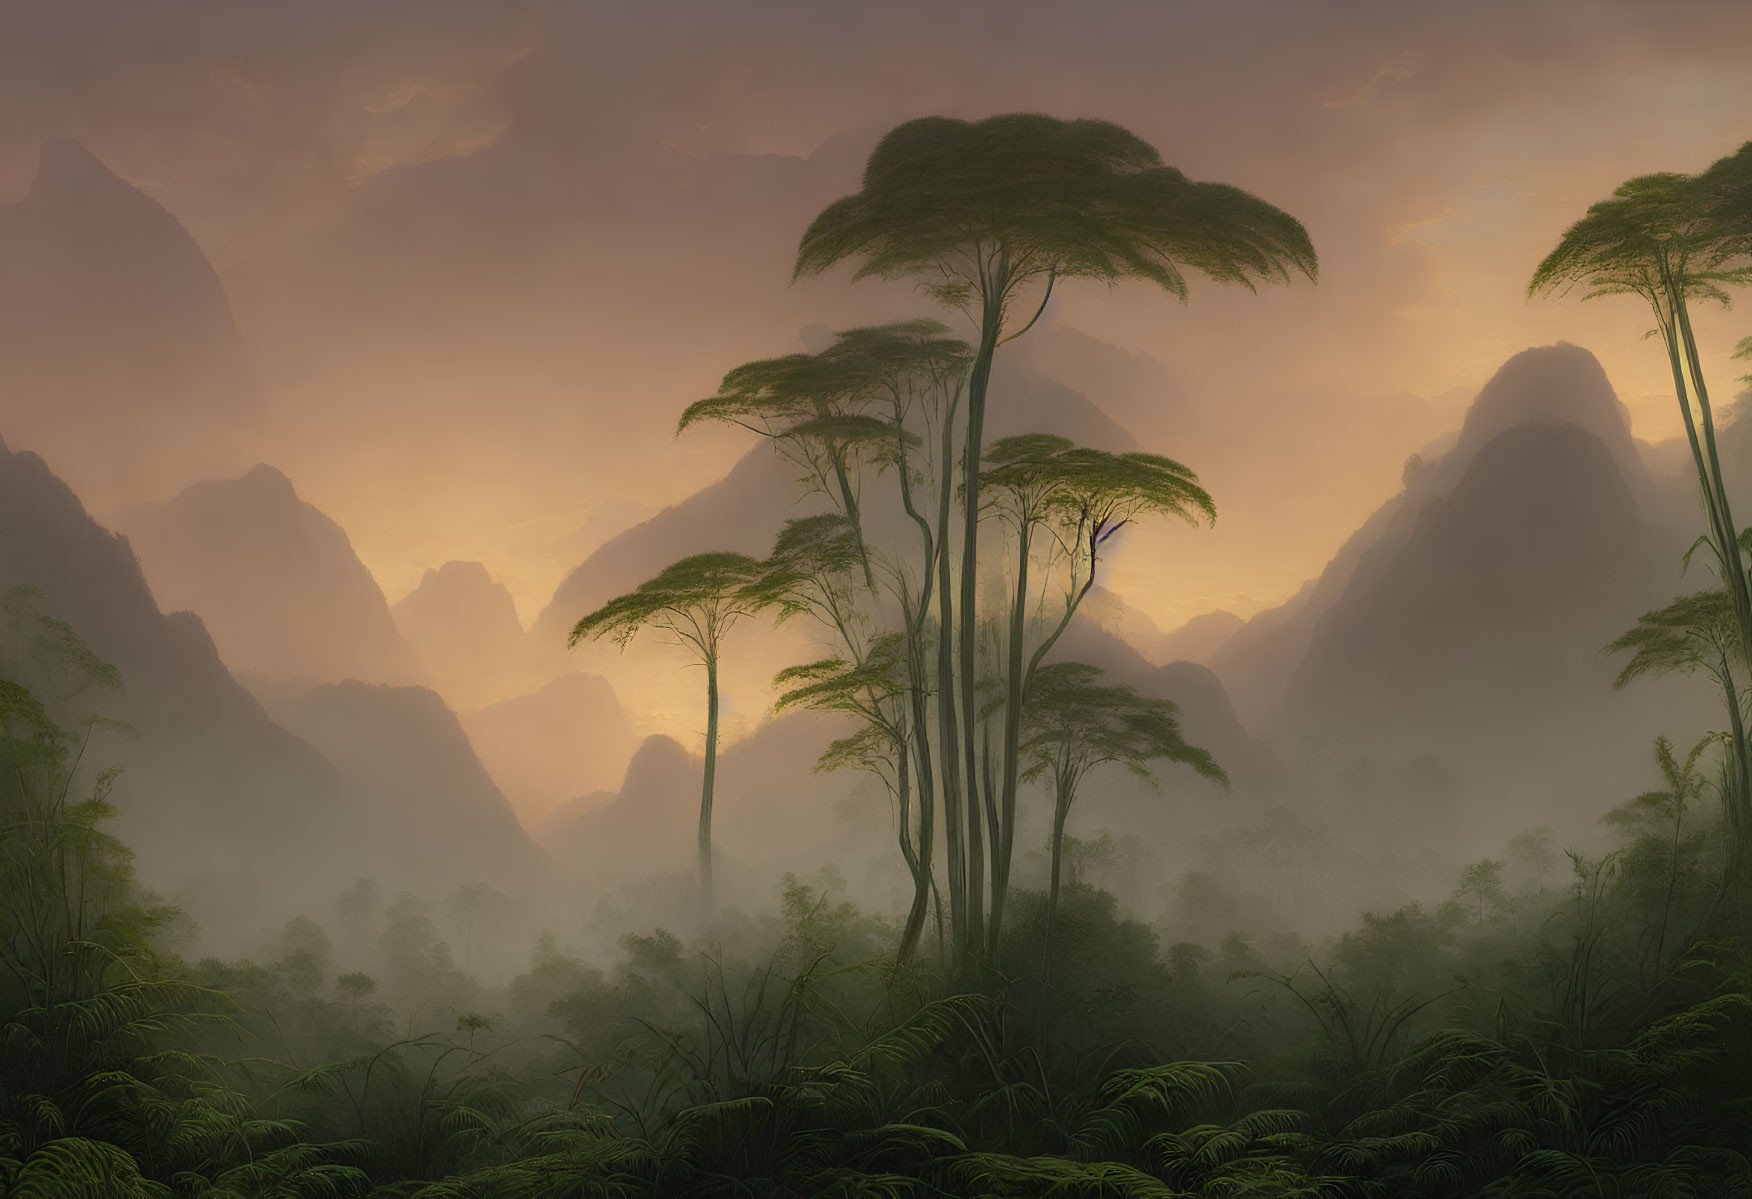 Serene sunrise jungle landscape with tall trees and mountain silhouettes